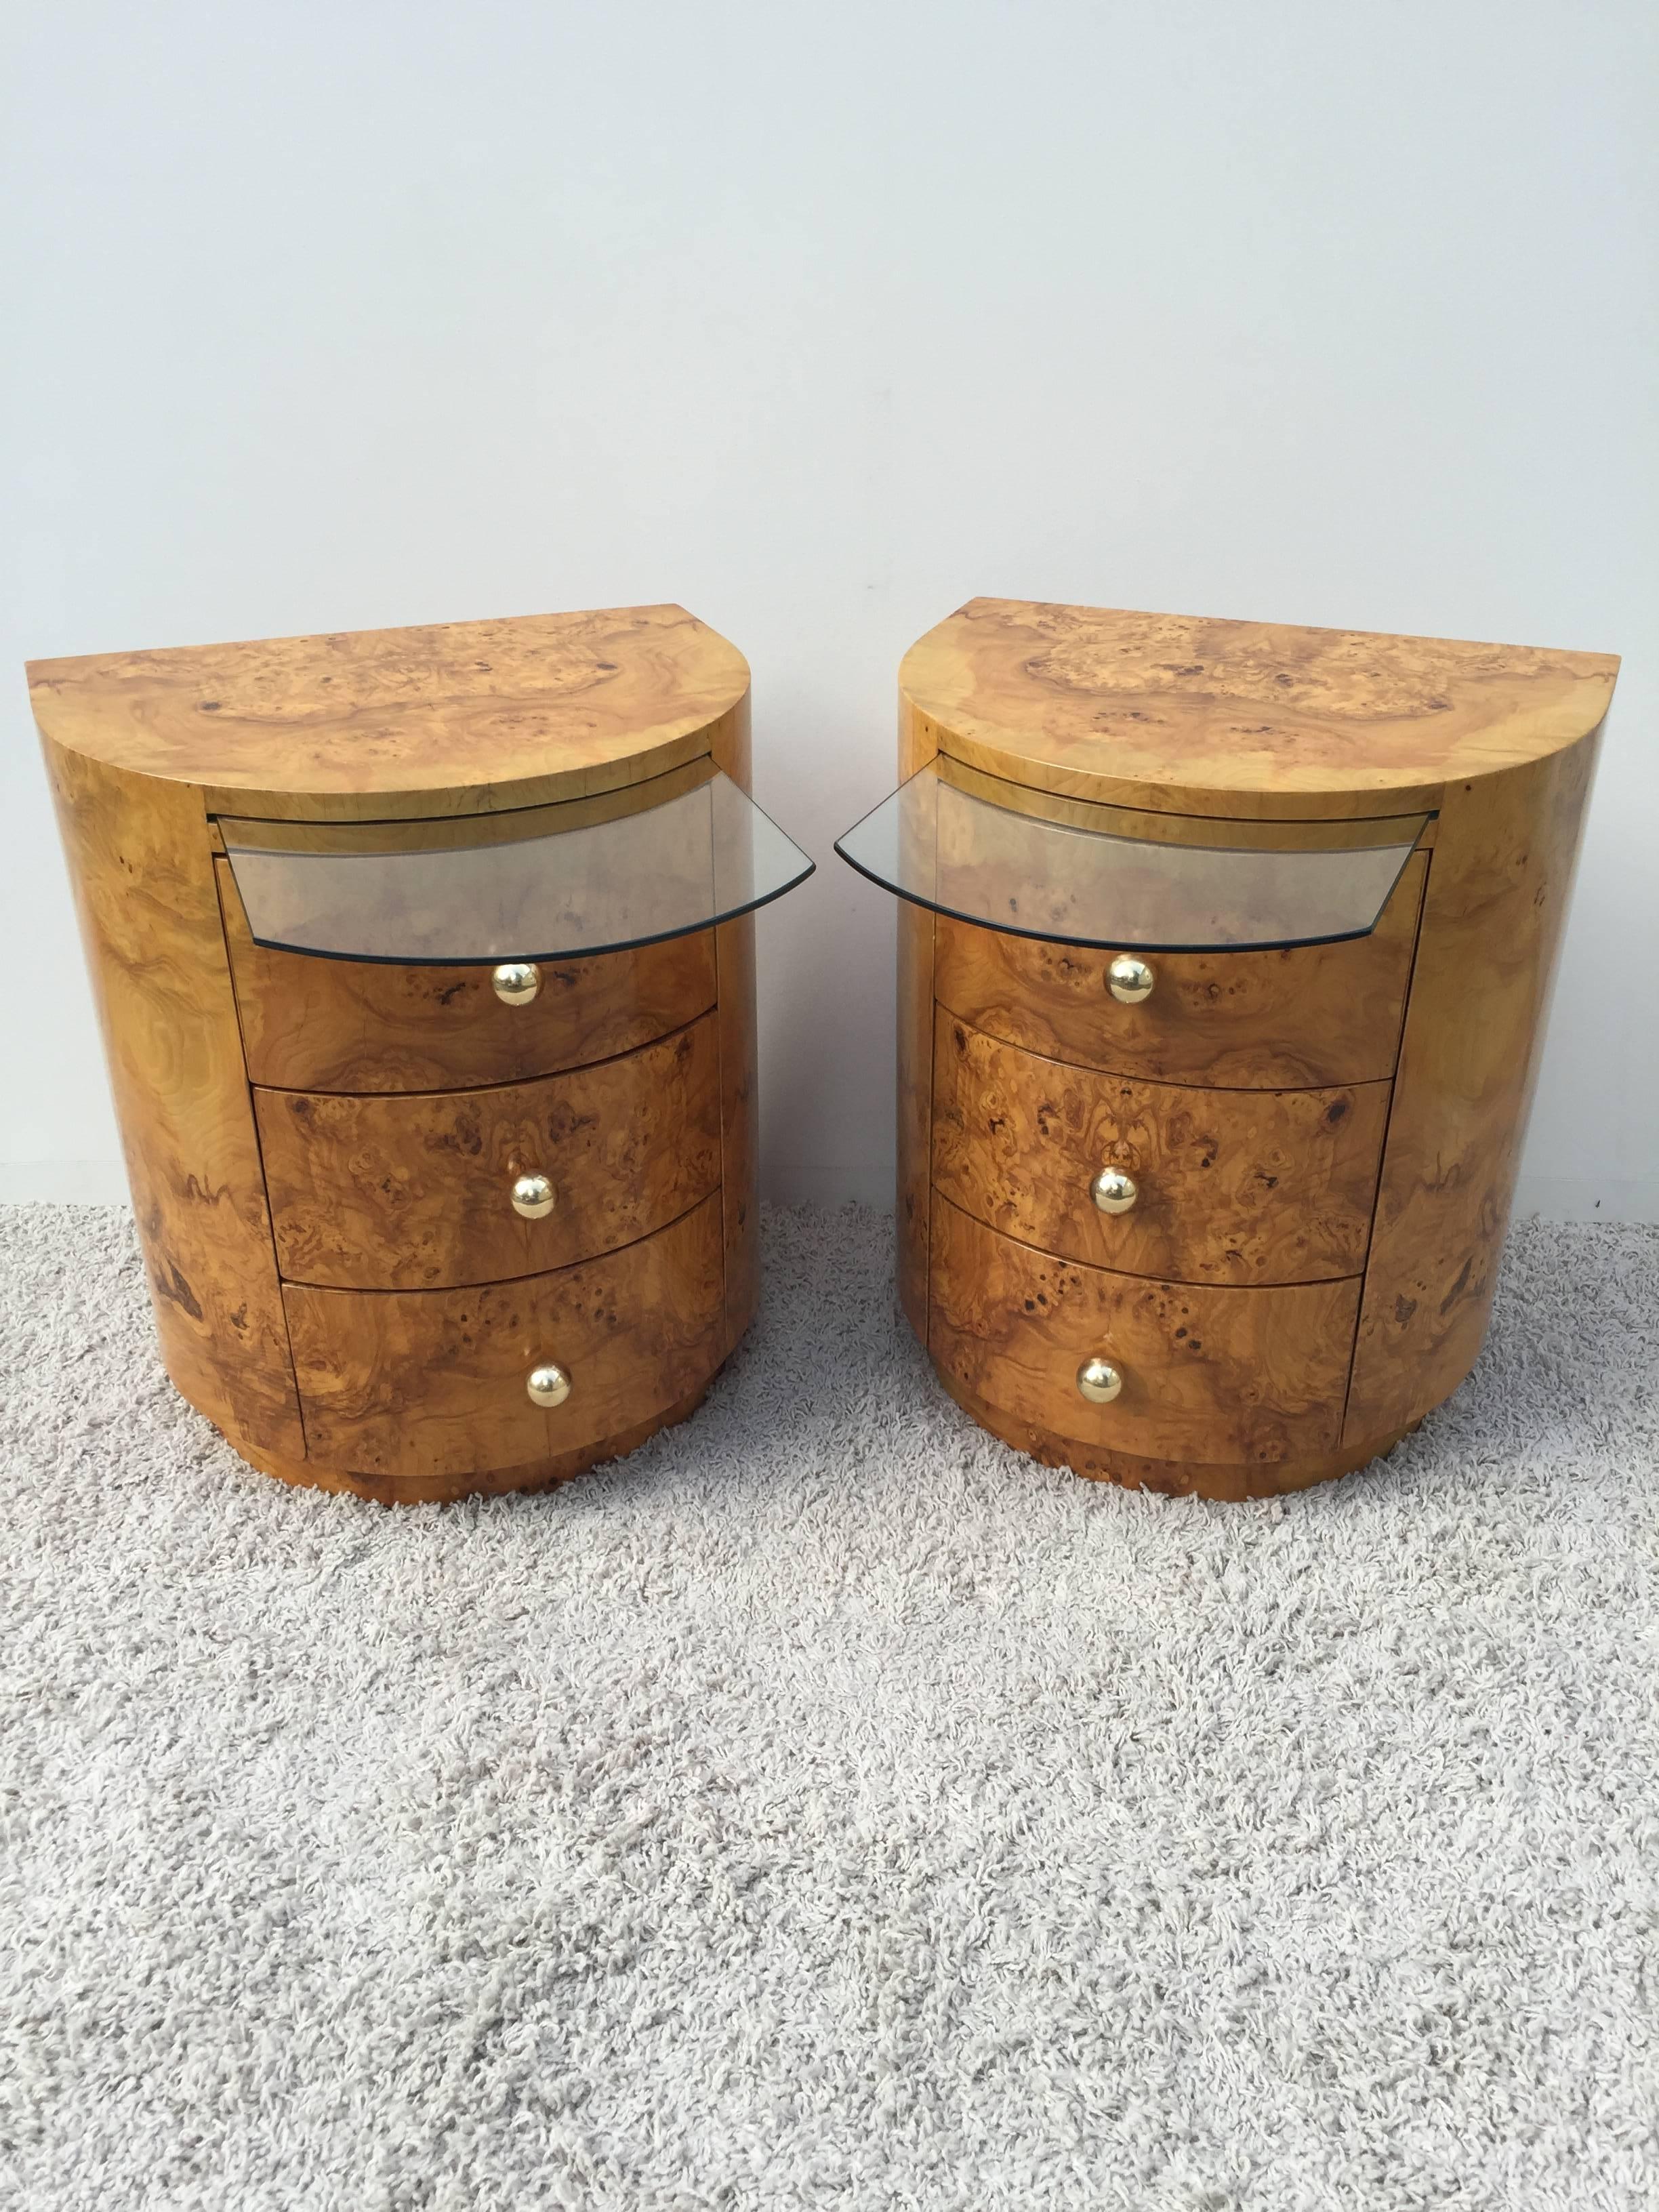 Rare Milo Baughman olive wood bookmatched nightstand/end tables with polished brass ball pulls and inset glass pull-out shelf, in exceptional original condition, French polished.